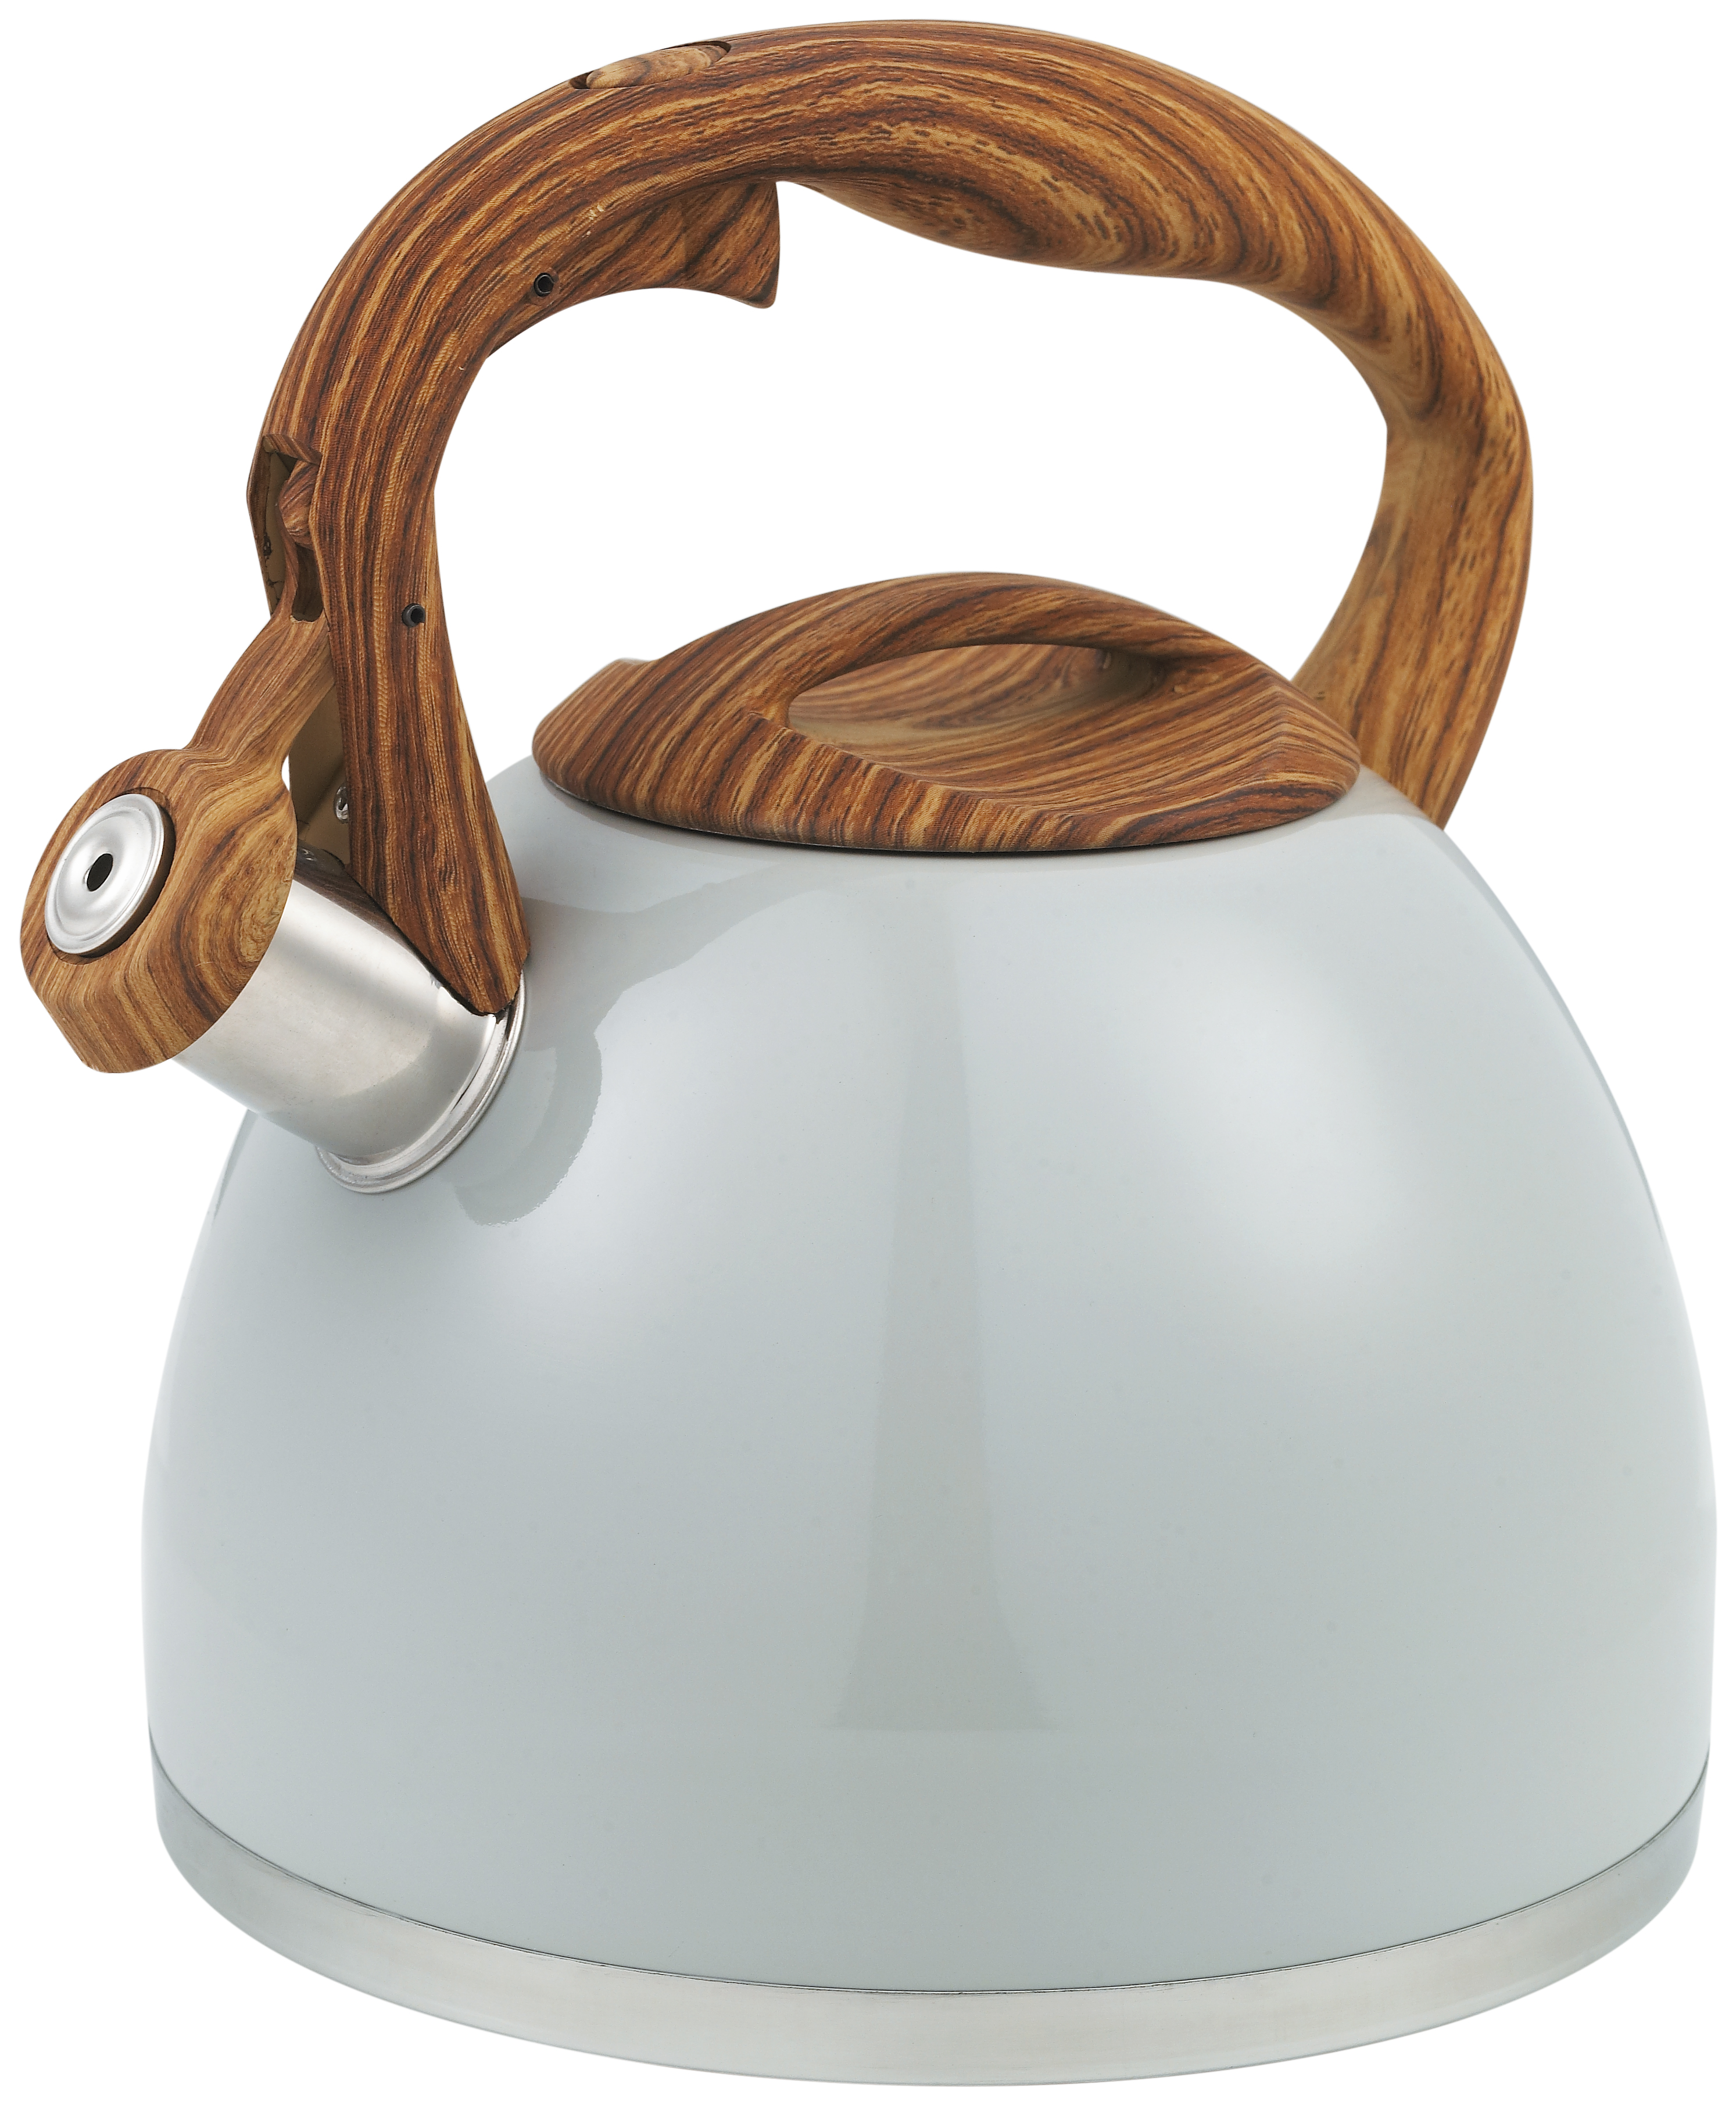 The Benefits of Owning a Whistle Kettle